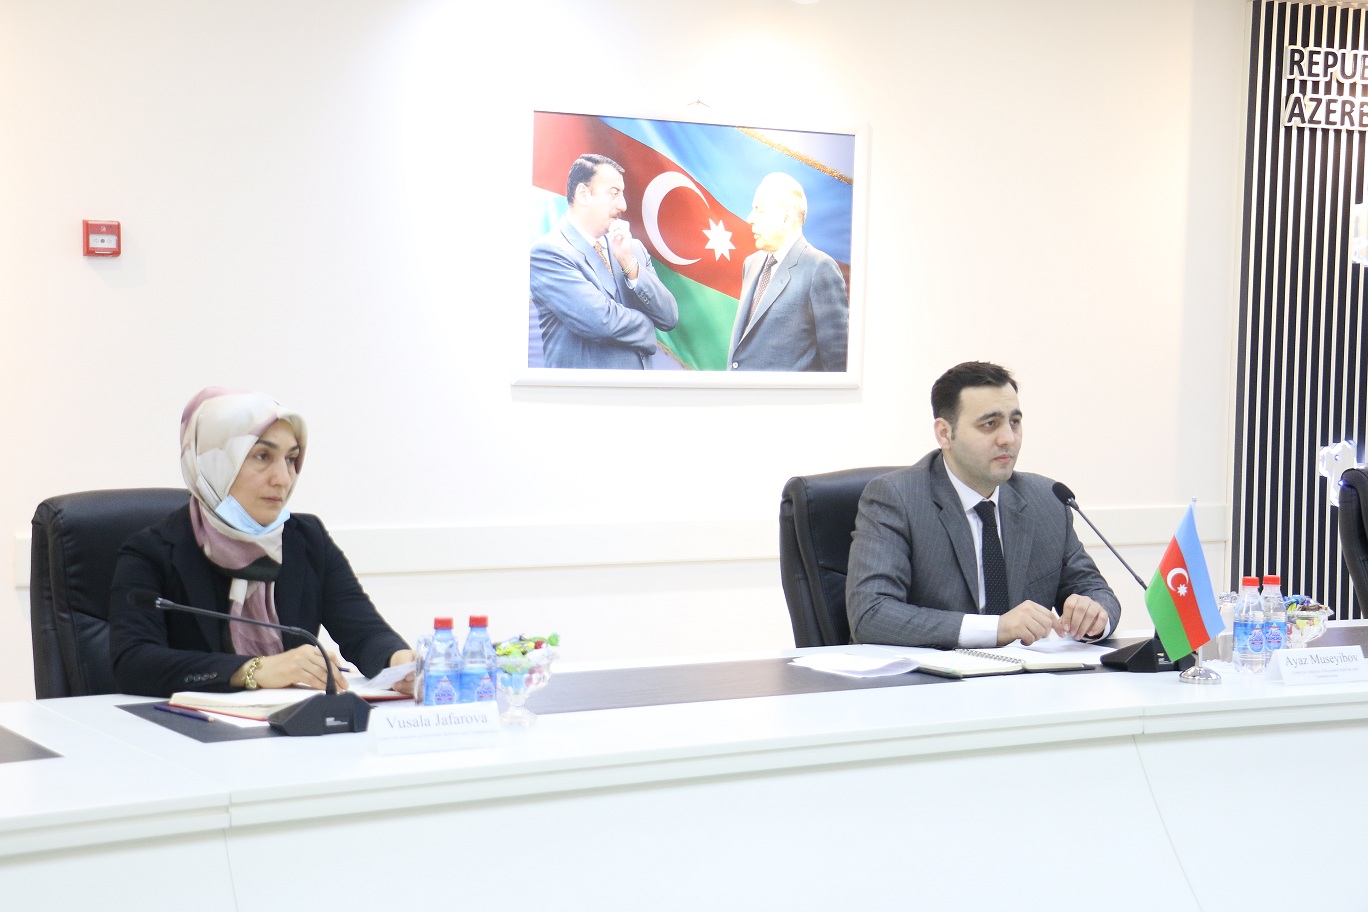 The Center for Analysis of Economic Reform and Communication (CAERC) Hosted a Meeting with Representatives of the Embassy of Japan in the Republic of Azerbaijan